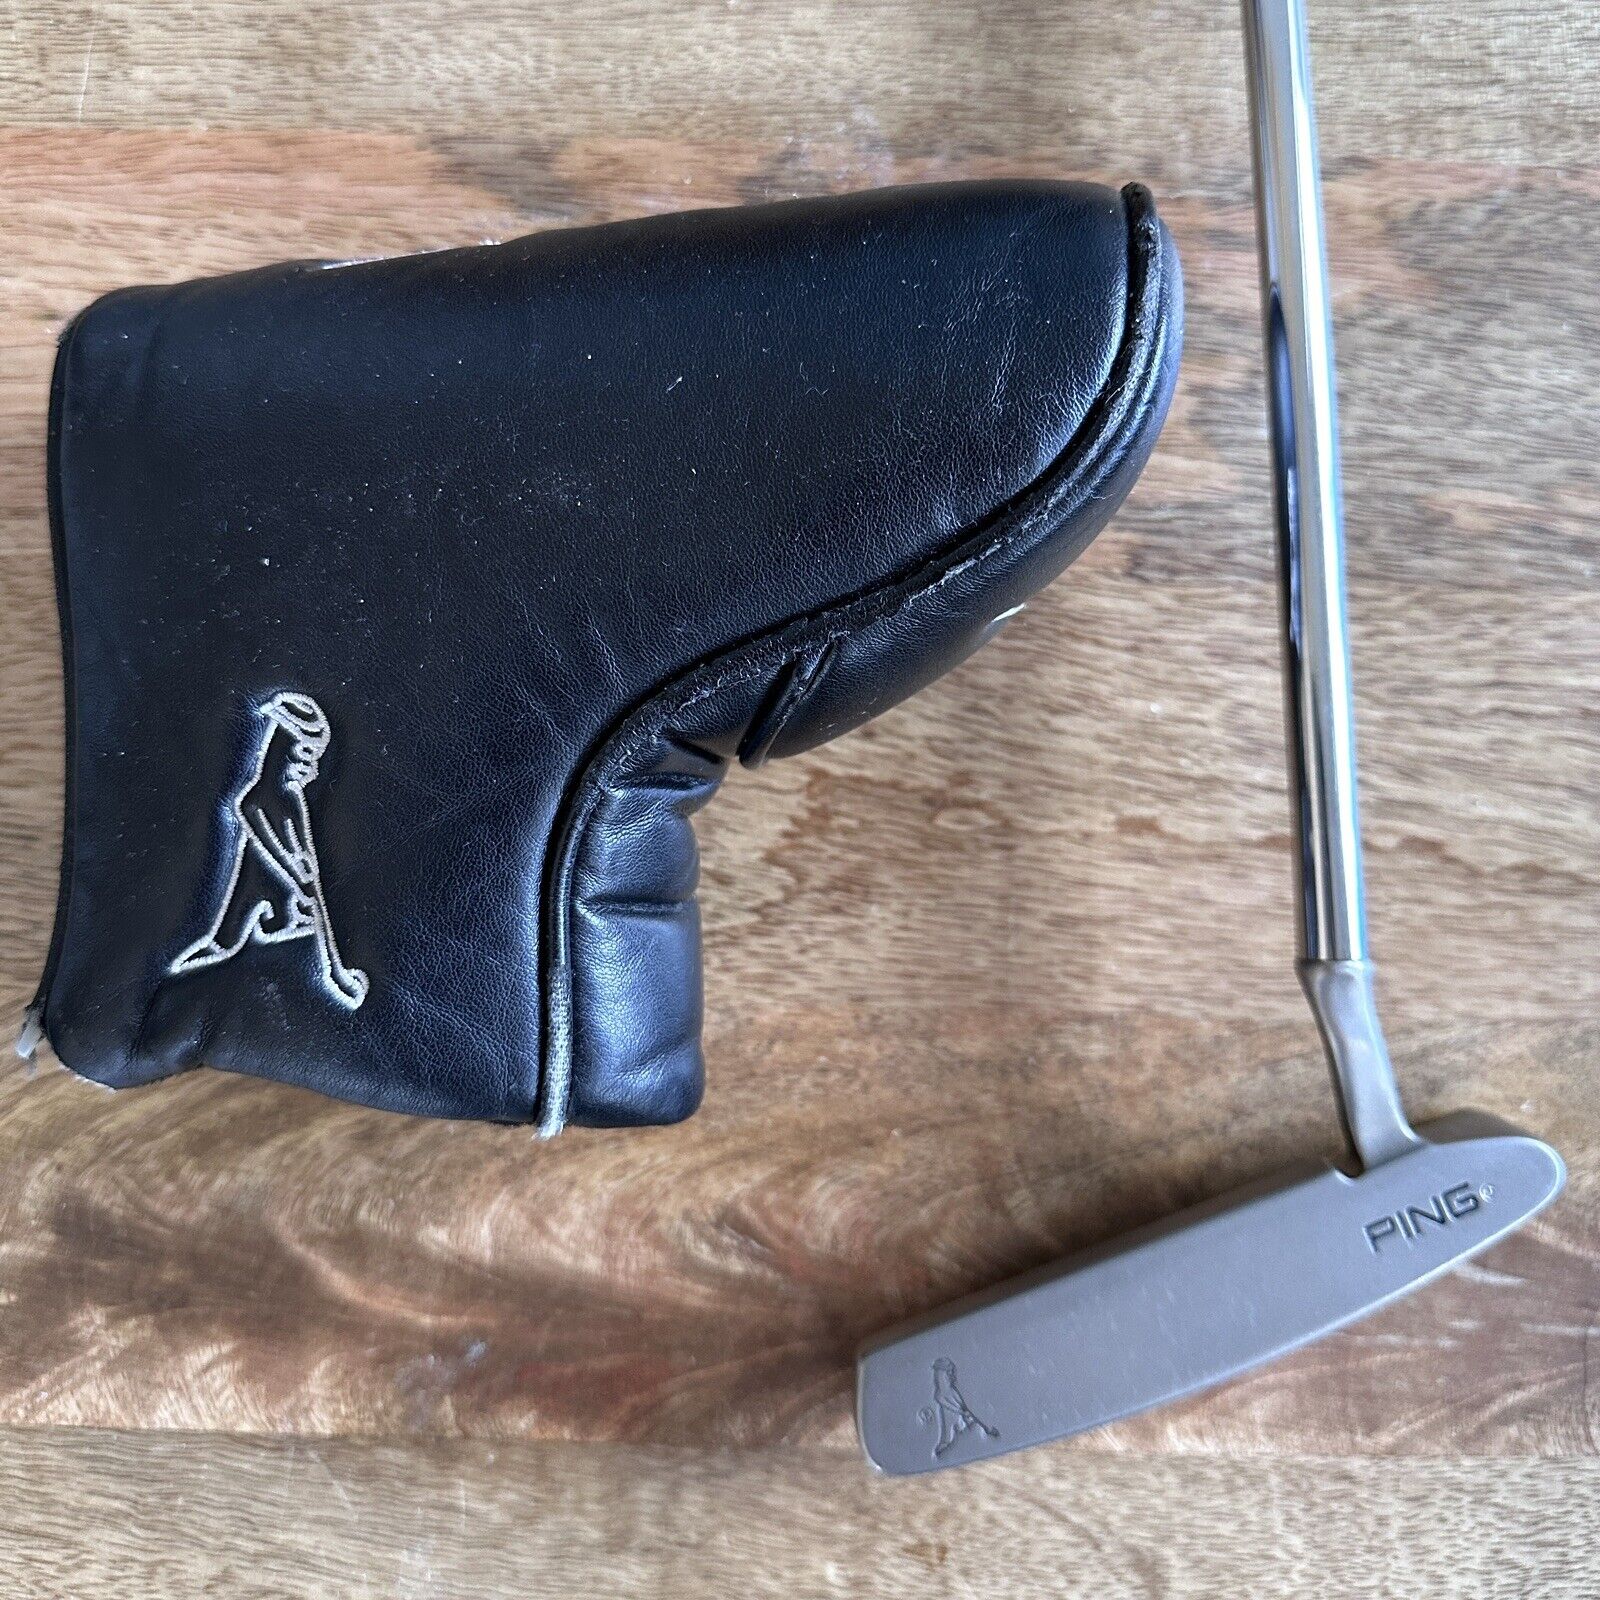 Ping Anser 4 Putter RH 34” with Headcover